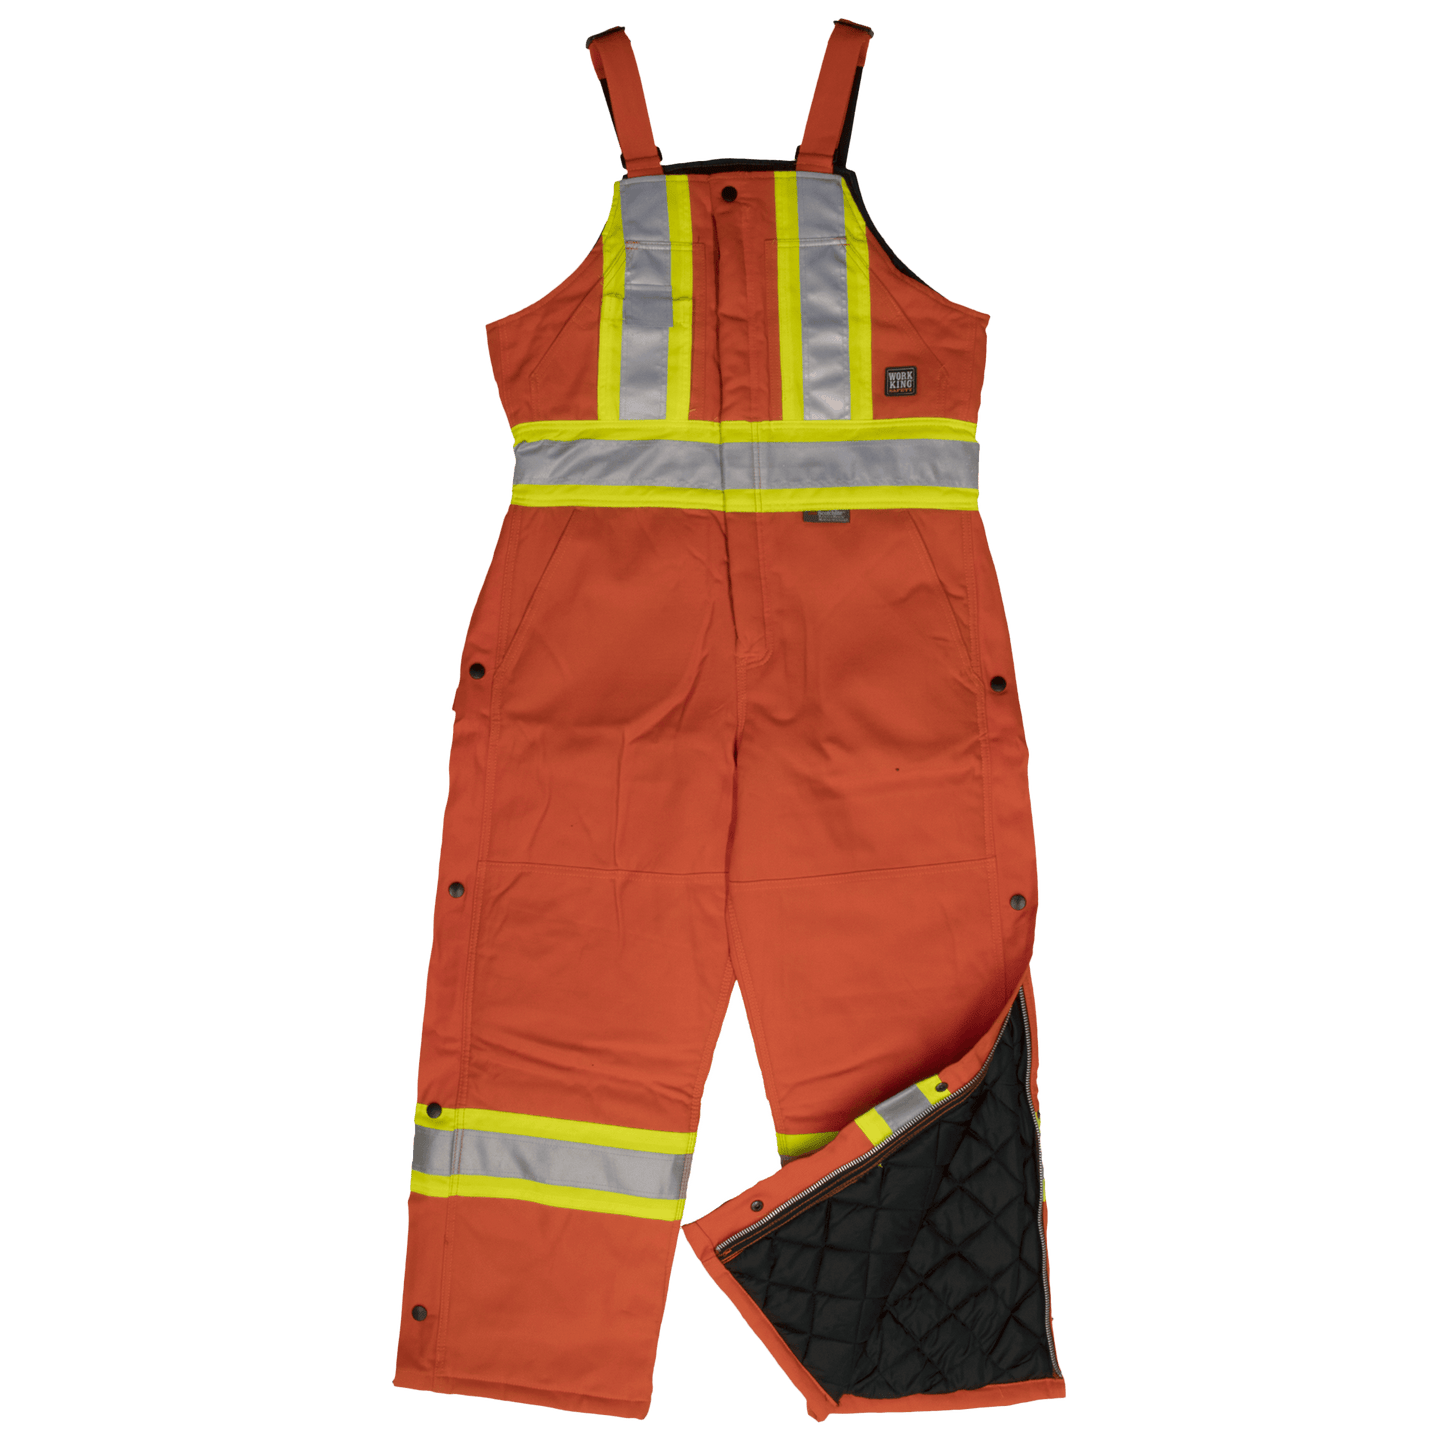 Tough Duck Insulated Safety Overall (Cotton Duck) - S757 - Orange